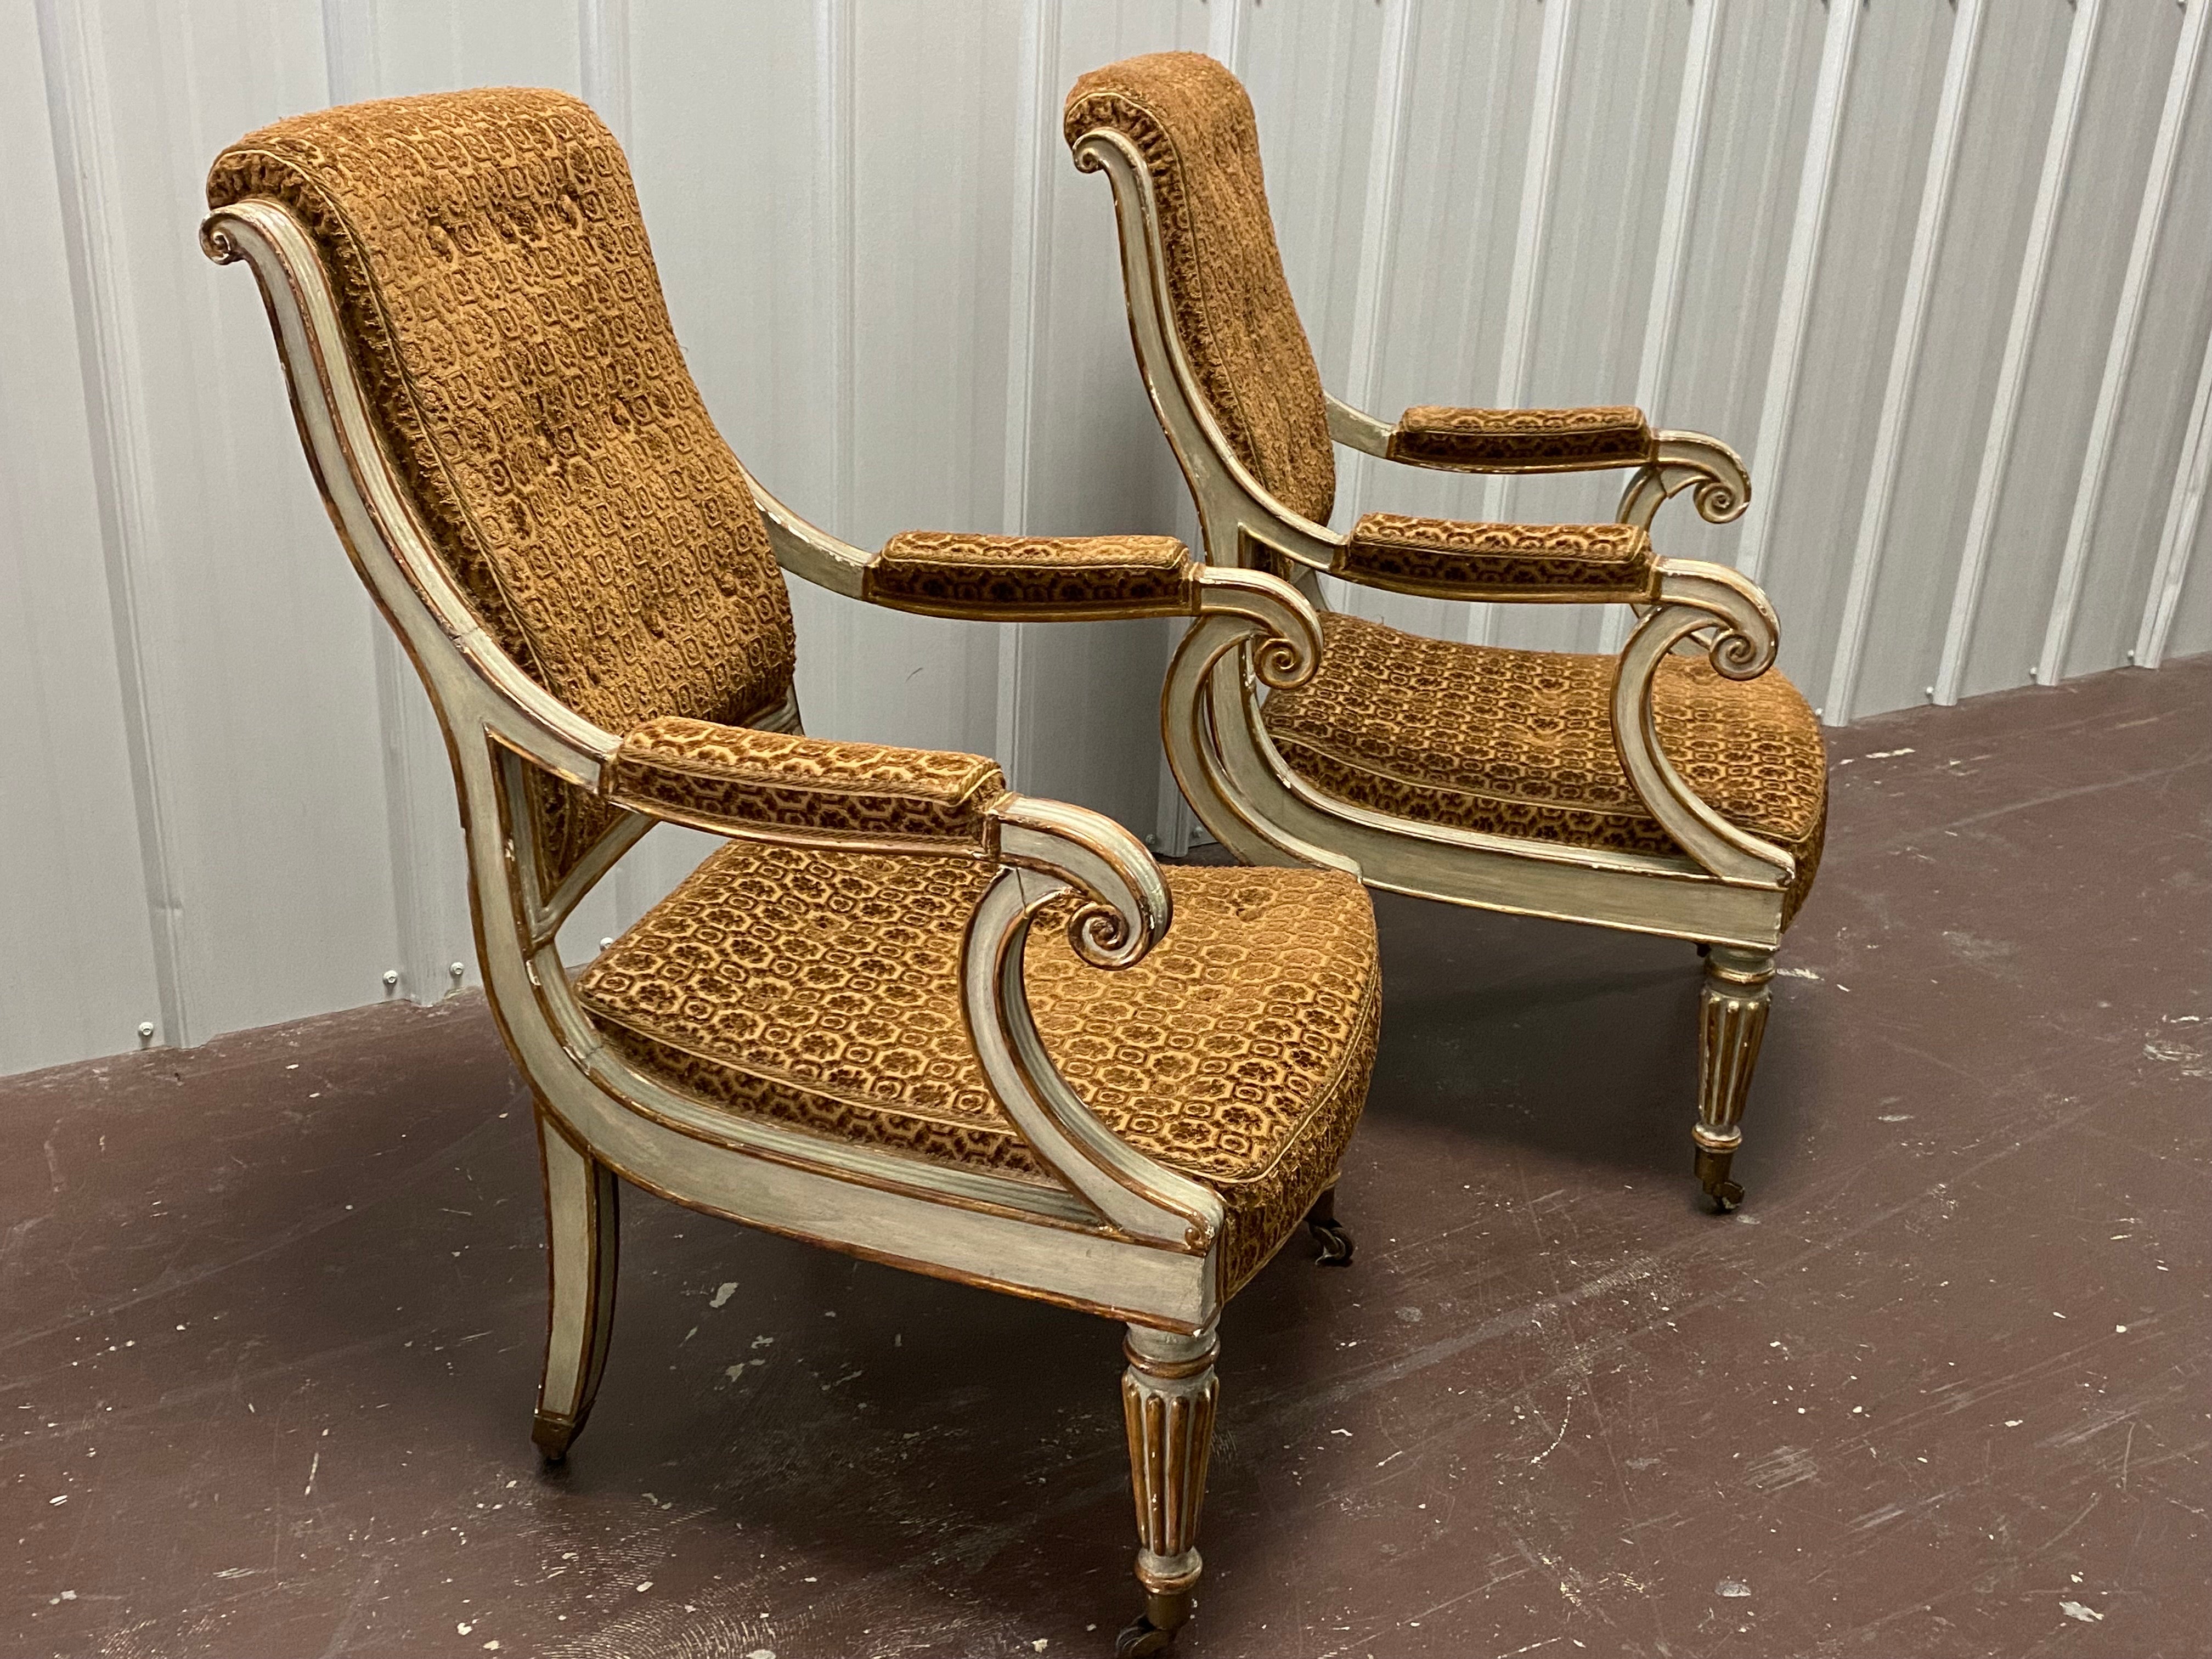 Pair of Charles X Velvet Painted & Parcel Gilt Armchairs, sourced by repute, David Easton. French Grey painted chairs with parcel gilding along edges, and reeding on front legs. Curved back with a gentle rolled back edge, arms scroll to front, back